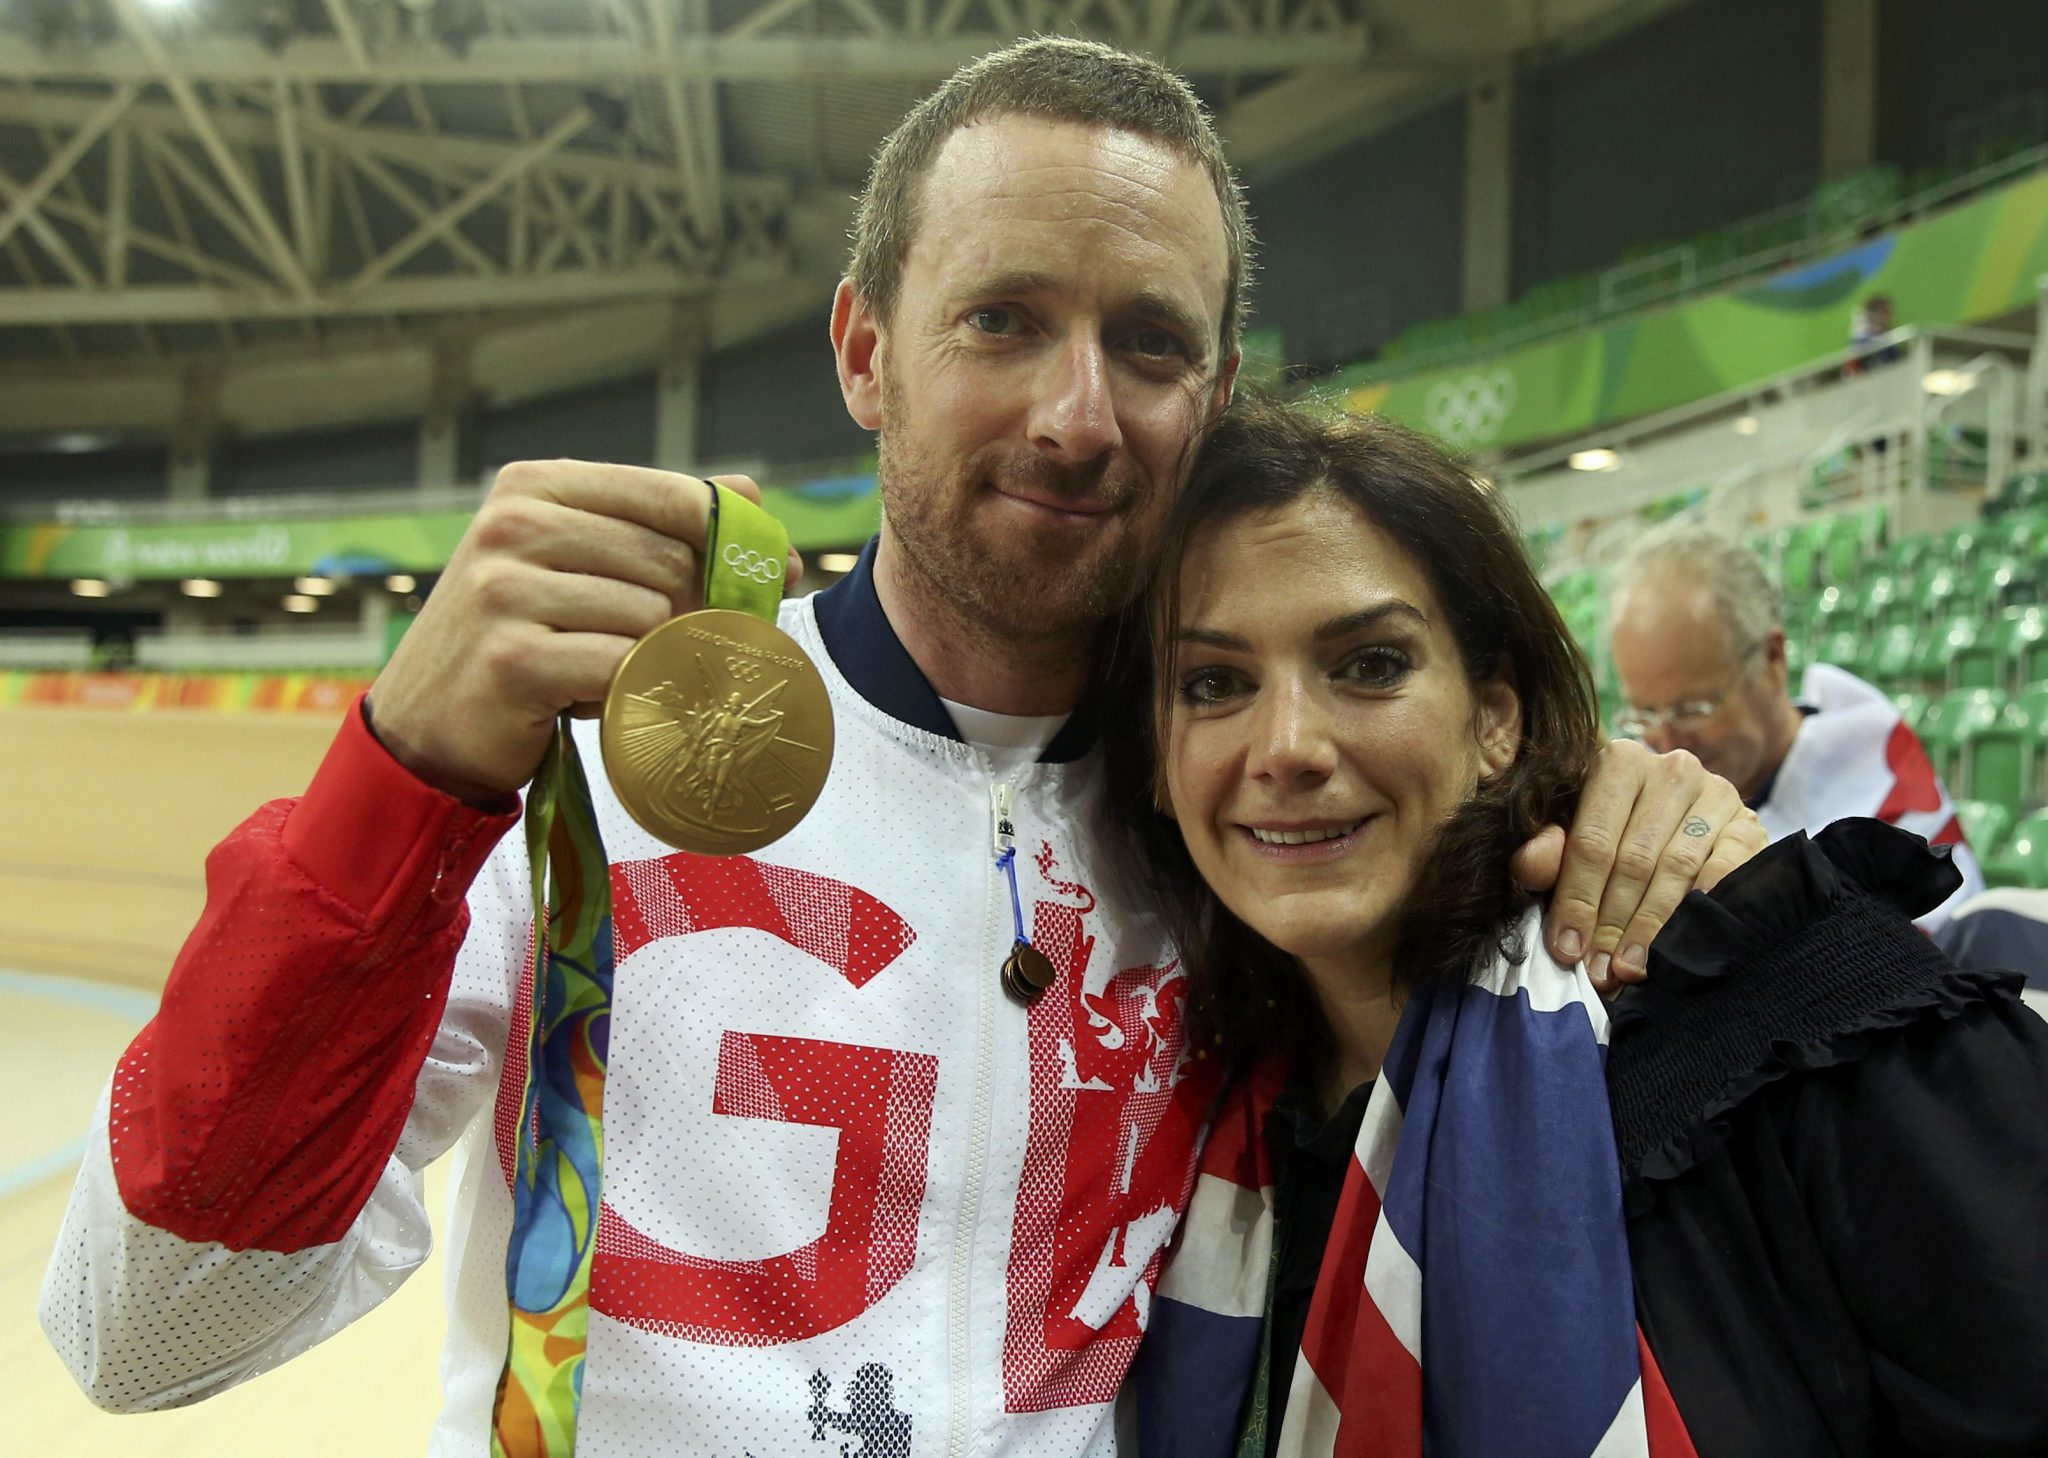 2016 Rio Olympics - Cycling Track - Victory Ceremony - Men's Team Pursuit Victory Ceremony - Rio Olympic Velodrome - Rio de Janeiro, Brazil - 12/08/2016. Bradley Wiggins (GBR) of Britain holds his gold medal and poses with his wife Catherine. REUTERS/Matthew Childs FOR EDITORIAL USE ONLY. NOT FOR SALE FOR MARKETING OR ADVERTISING CAMPAIGNS.